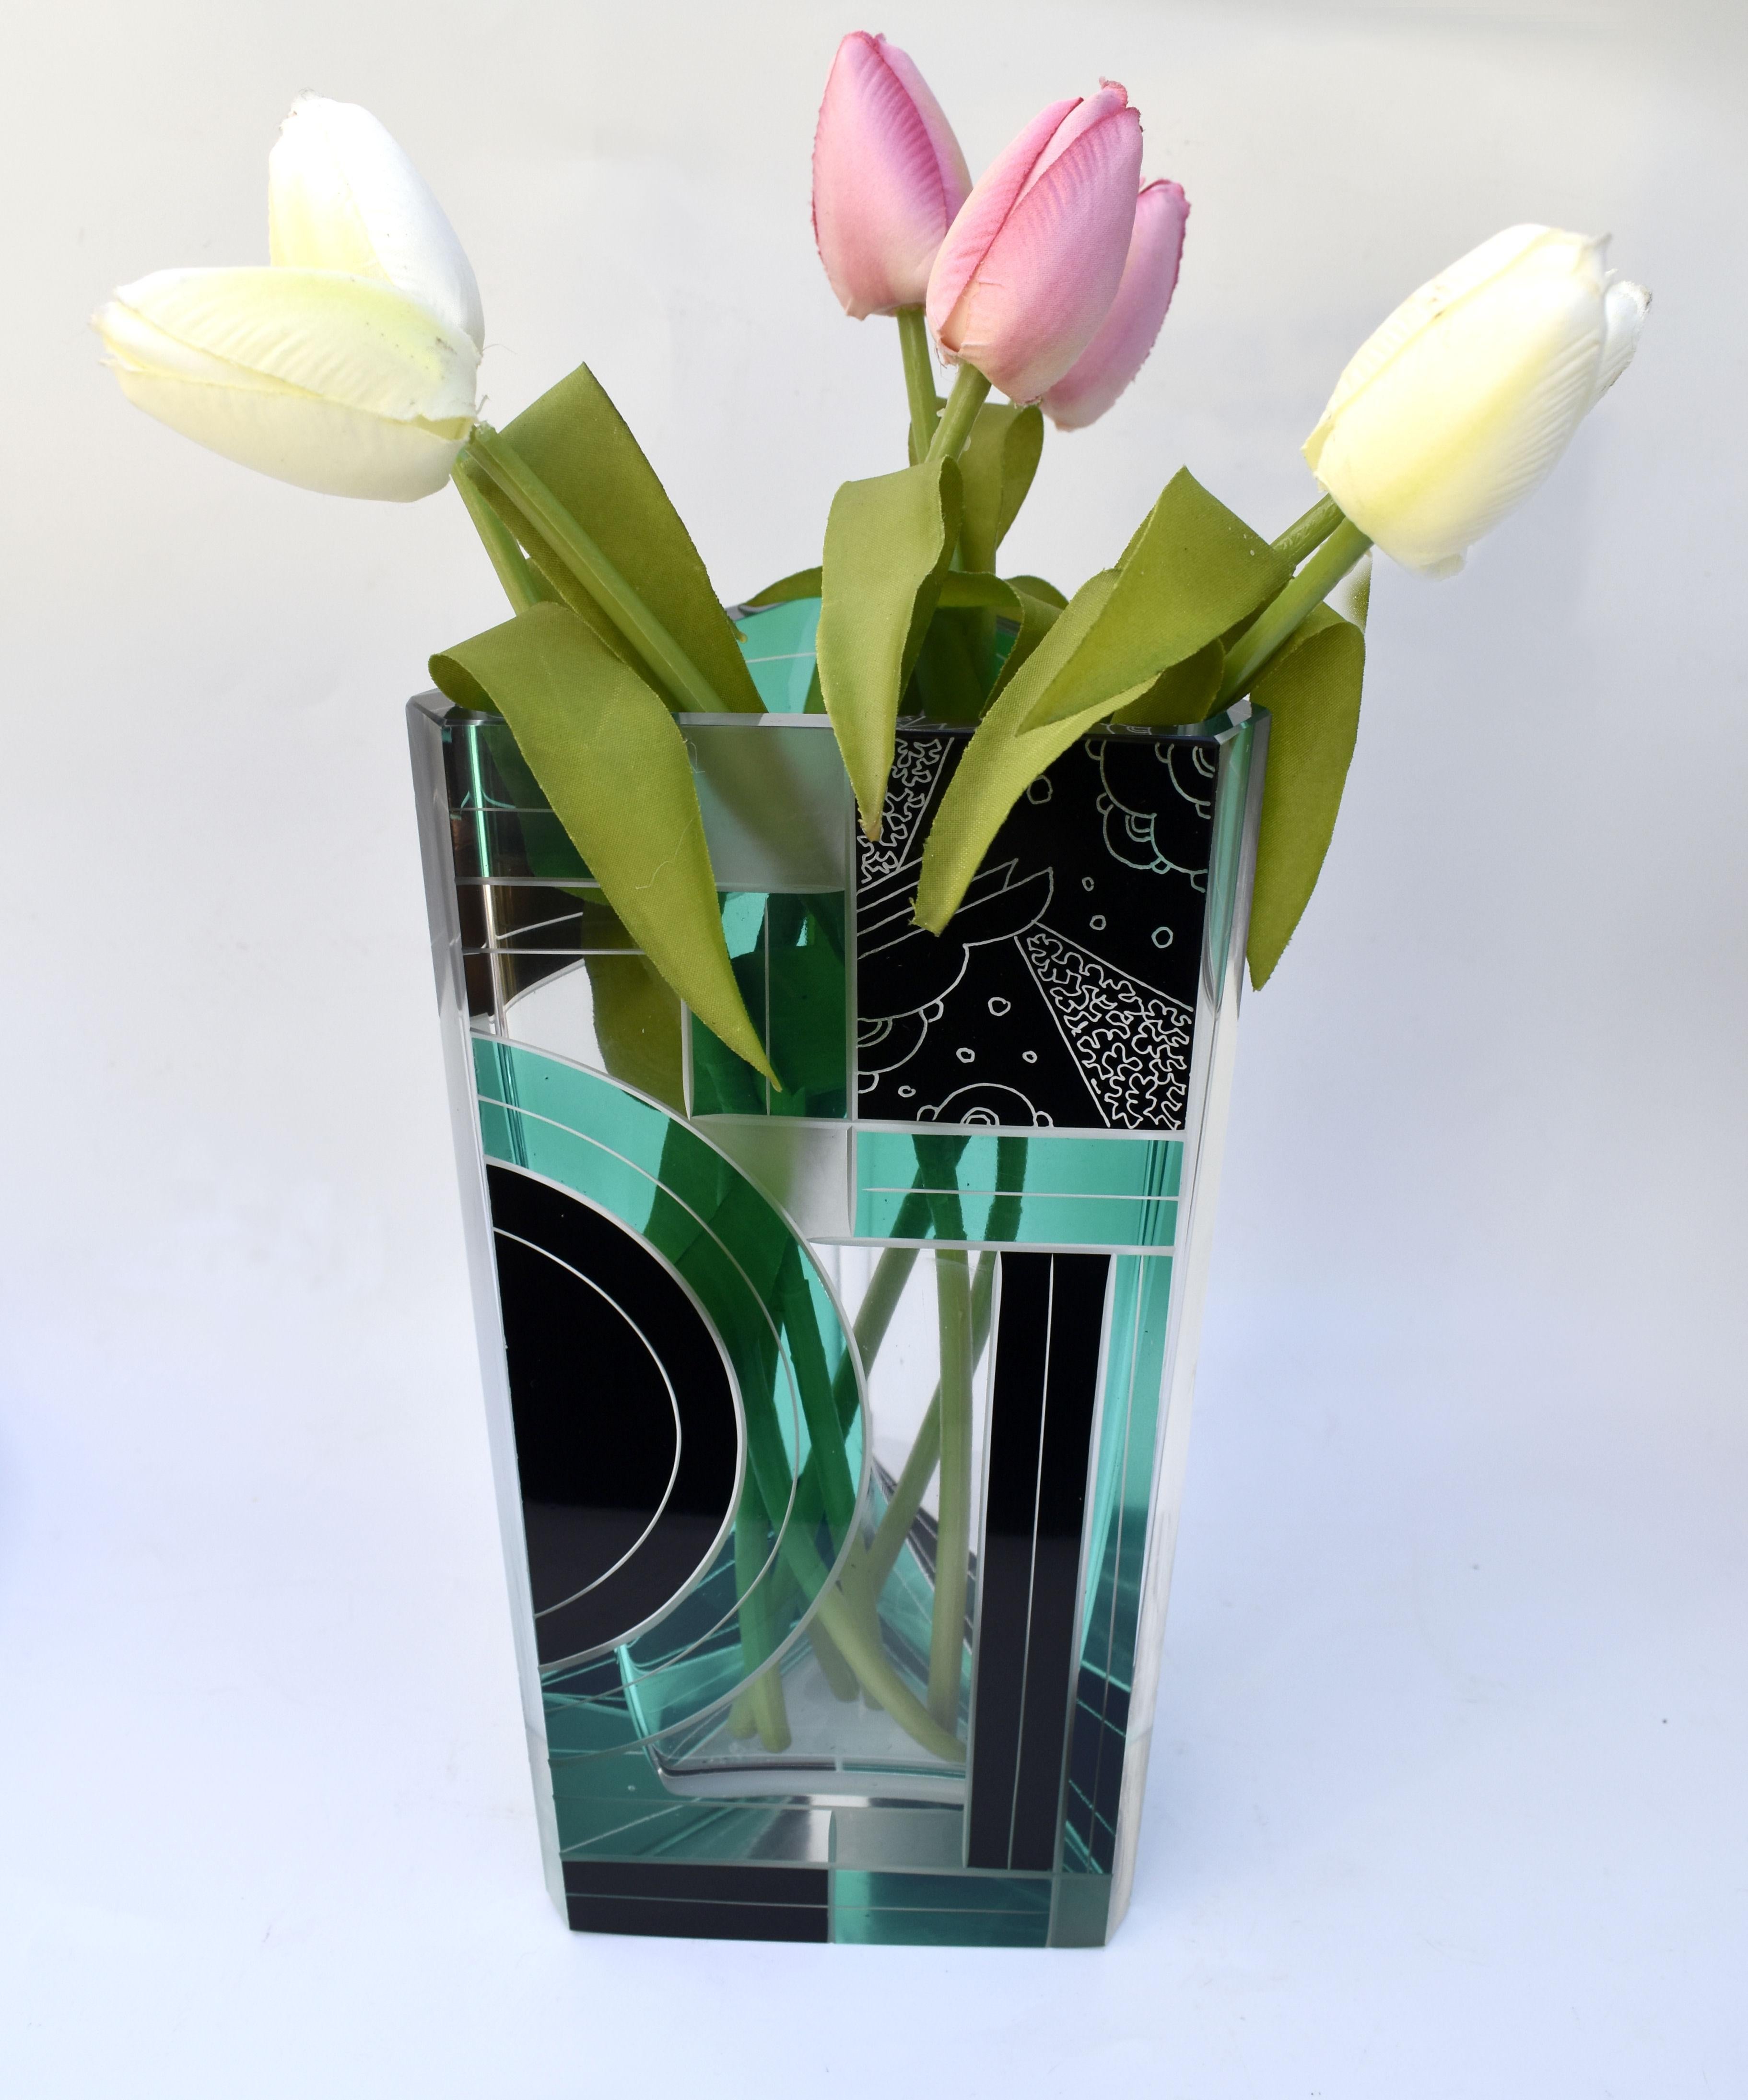 Originating from Czech republic this Art Deco vase not only visually looks stunning with it's very distinctive colourway and patterning but is a great size standing just over 25 cm. The glass is extremely thick and therefore the vase itself is